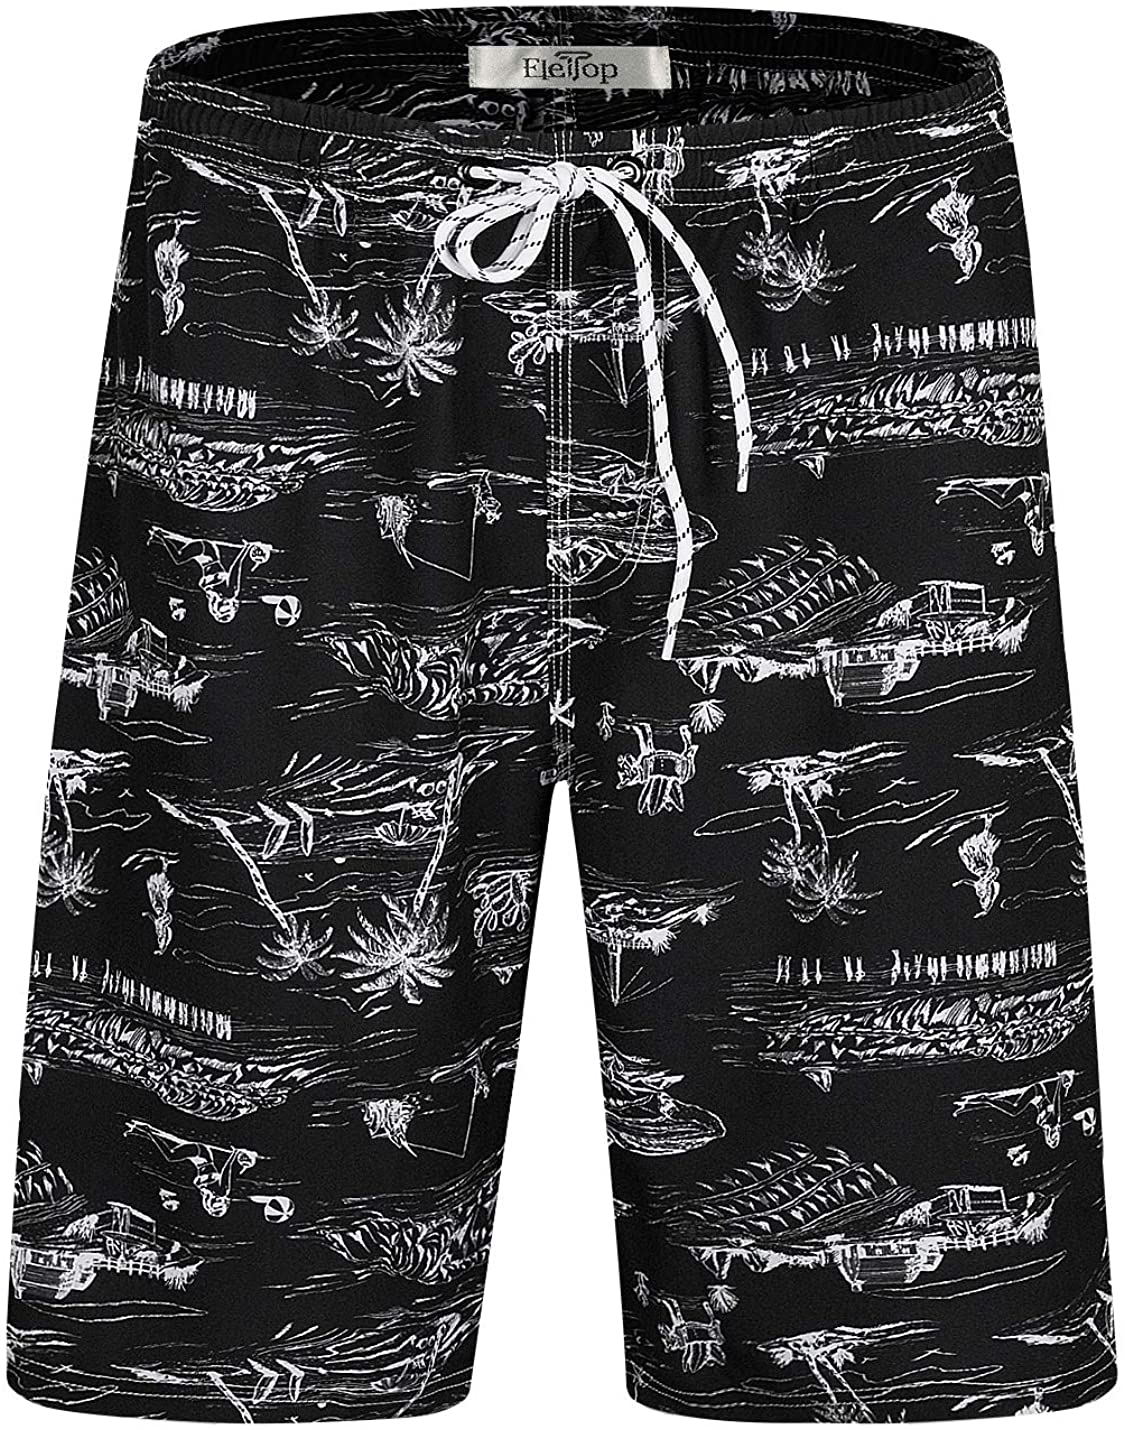 ELETOP Men's Swim Trunks Quick Dry Board Shorts for Swimming Beach Holiday Bathing Suit L2 